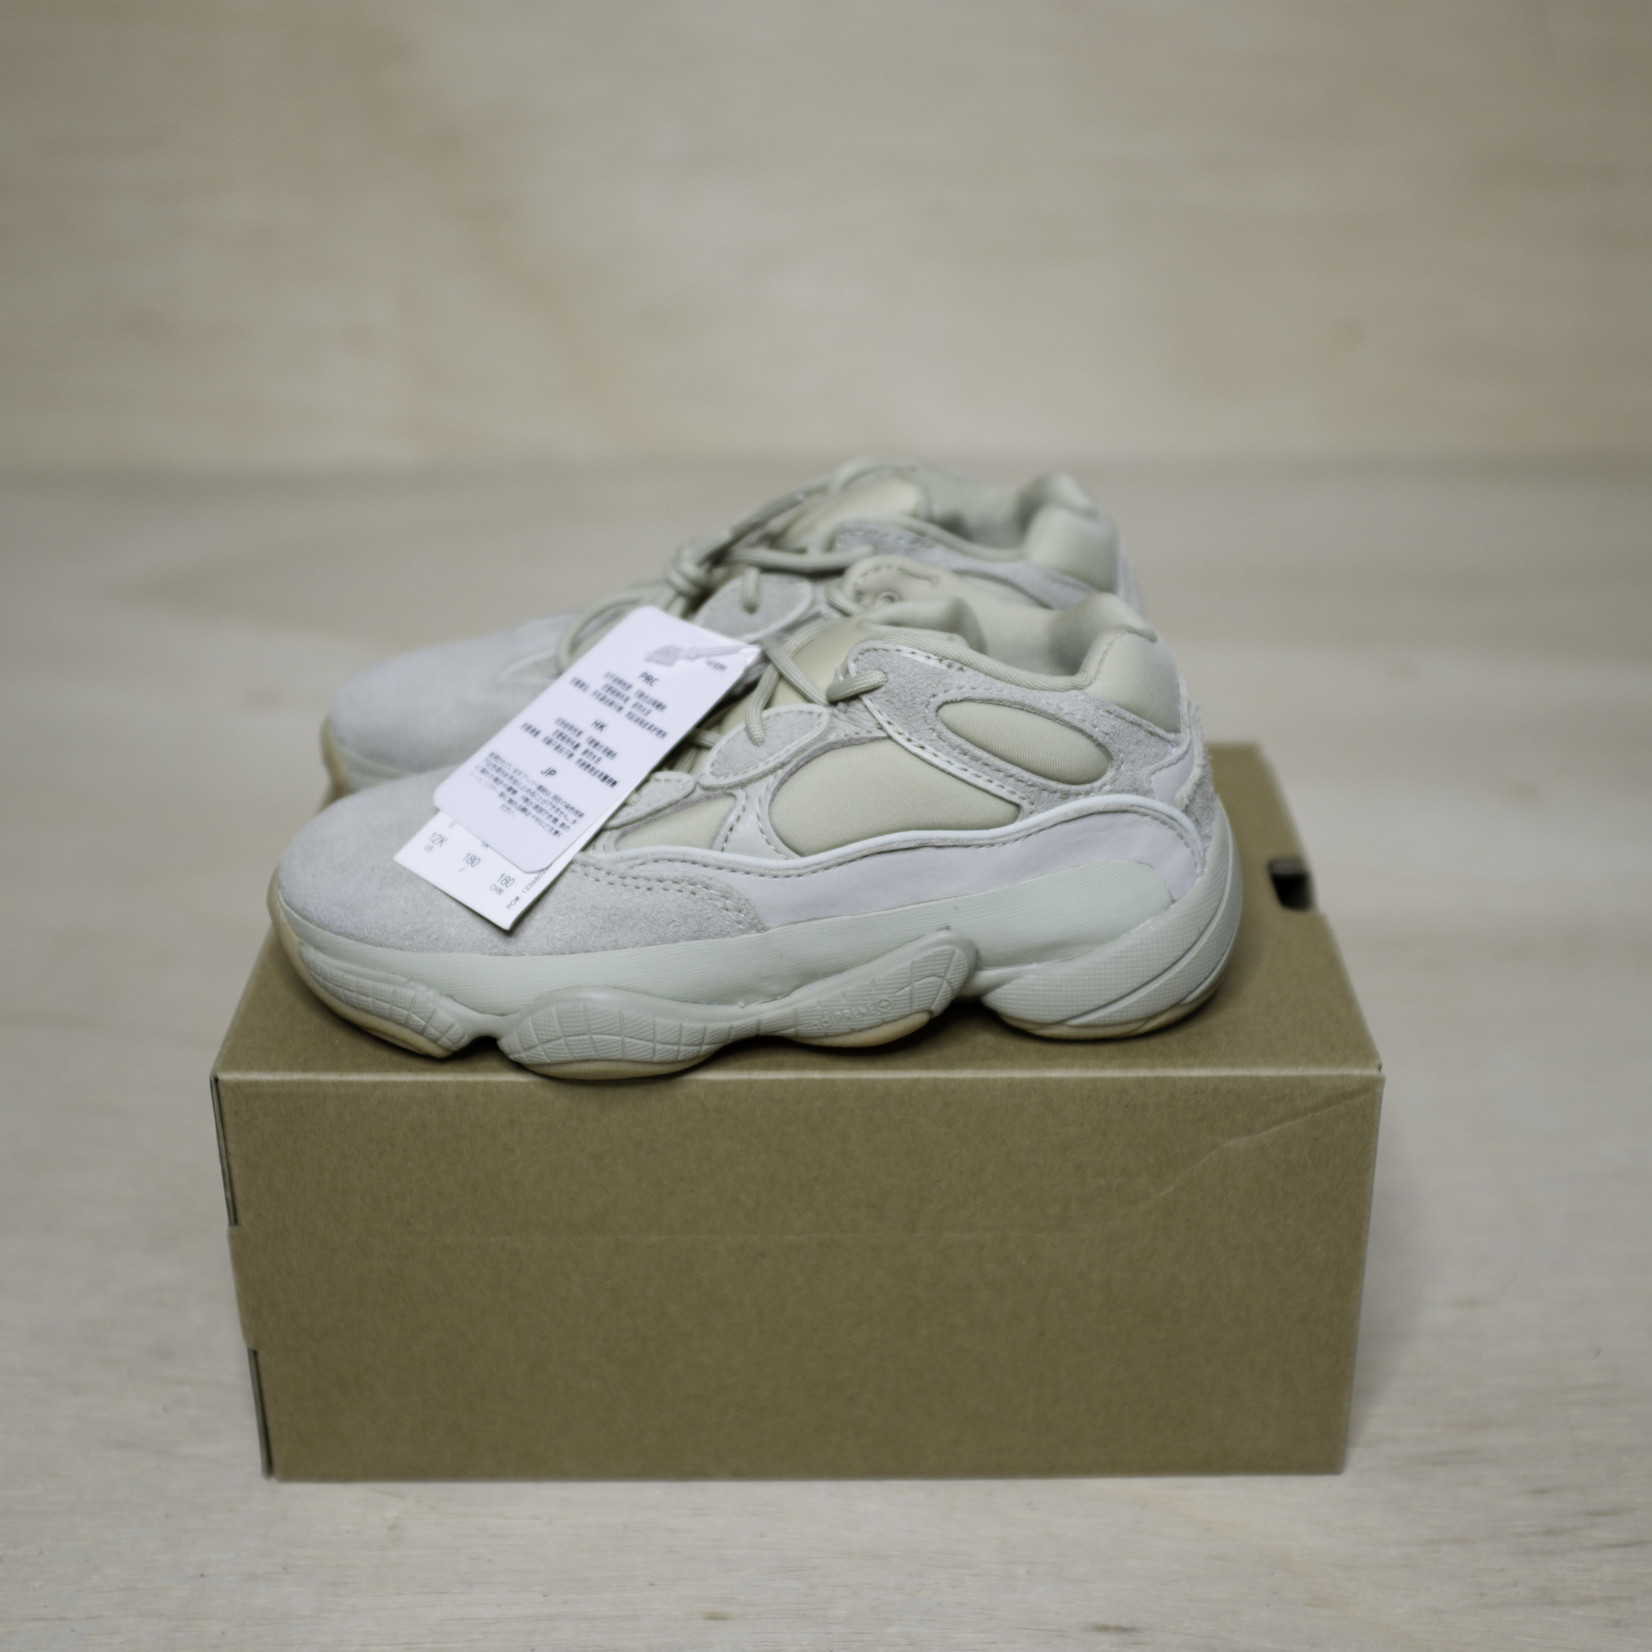 adidas Yeezy 500 Stone Size 9, DS BRAND NEW - SoleSeattle